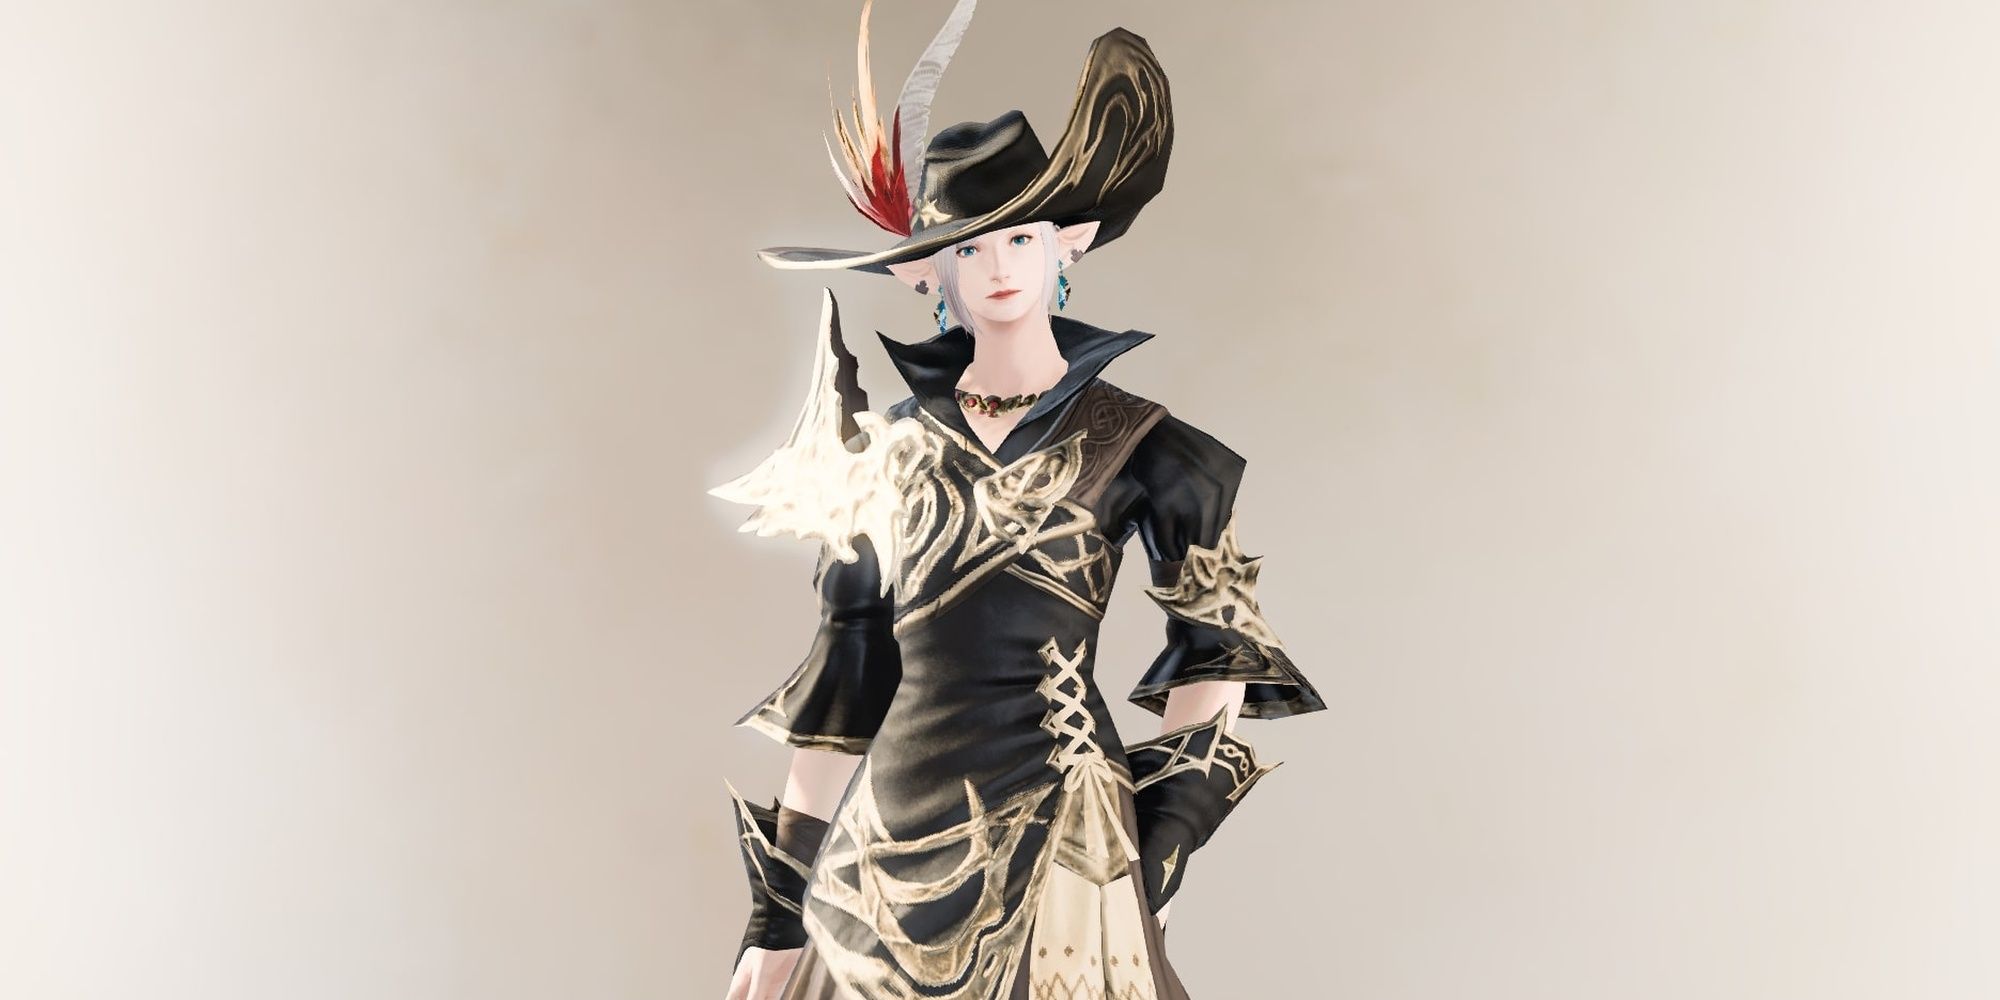 Final Fantasy 14 Elezen Character in Forgiven Glamour Against an Off-White Background